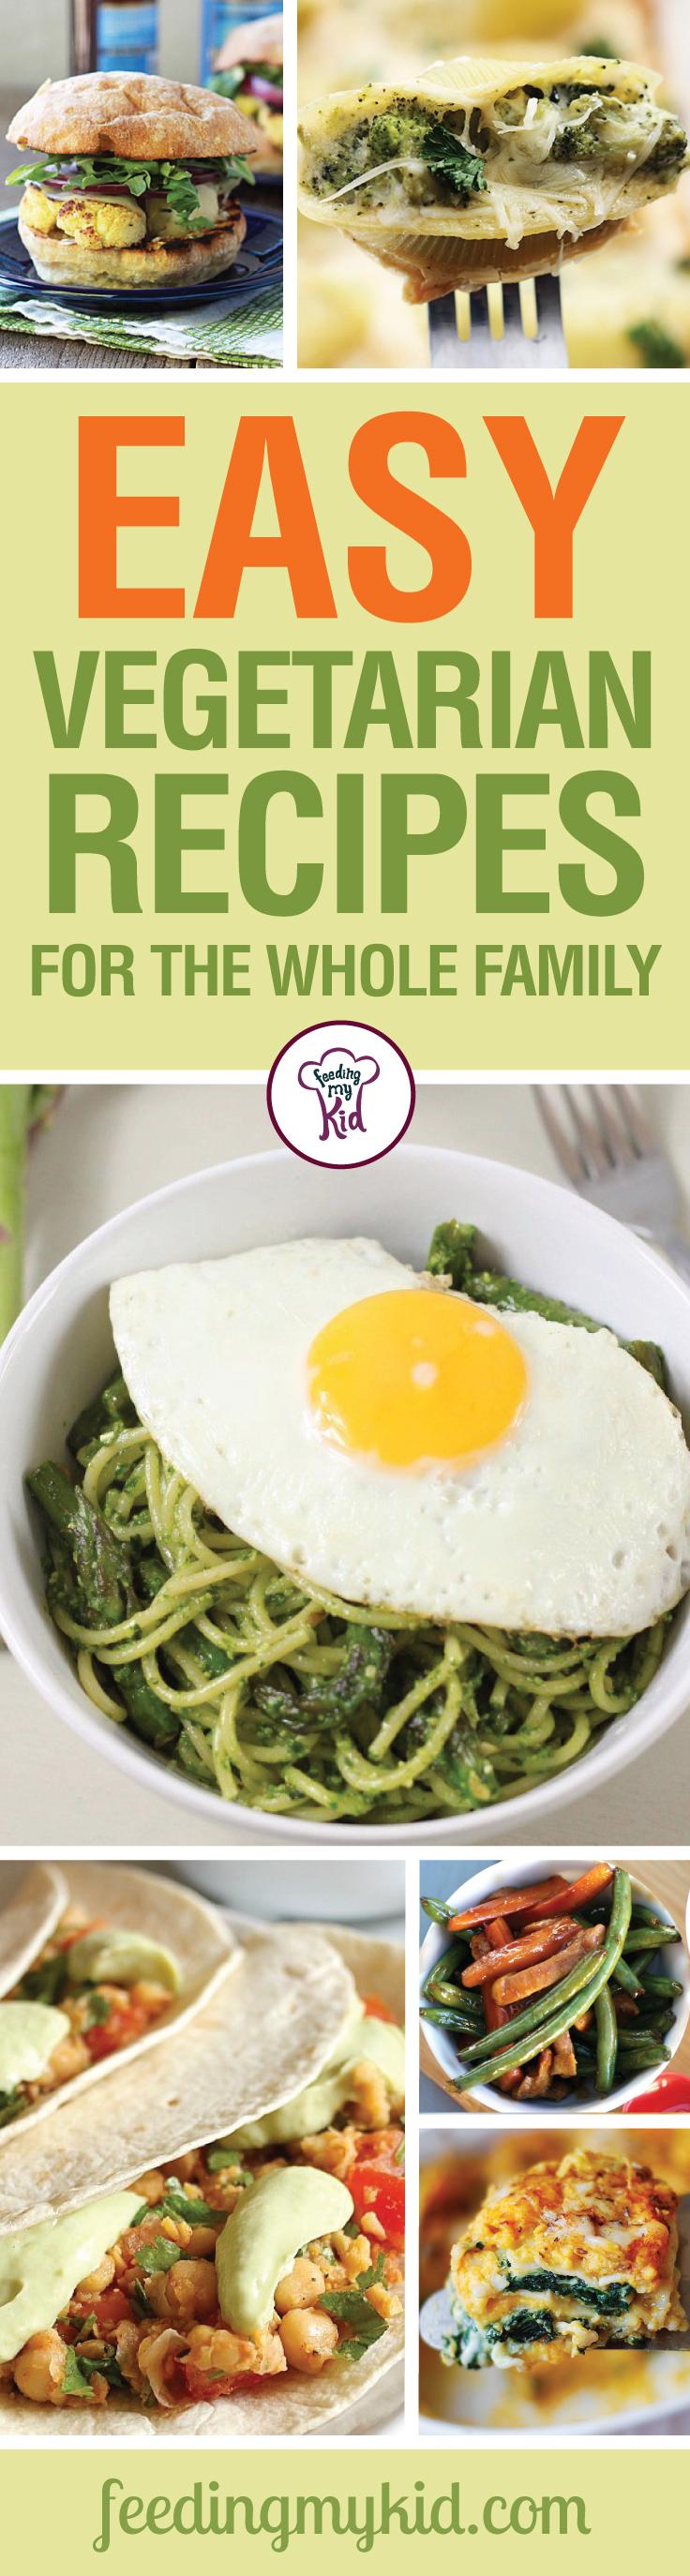 Try these amazing easy vegetarian recipes that the whole family will love. Meatless meals don't have to be boring or flavorless thanks to these recipes!